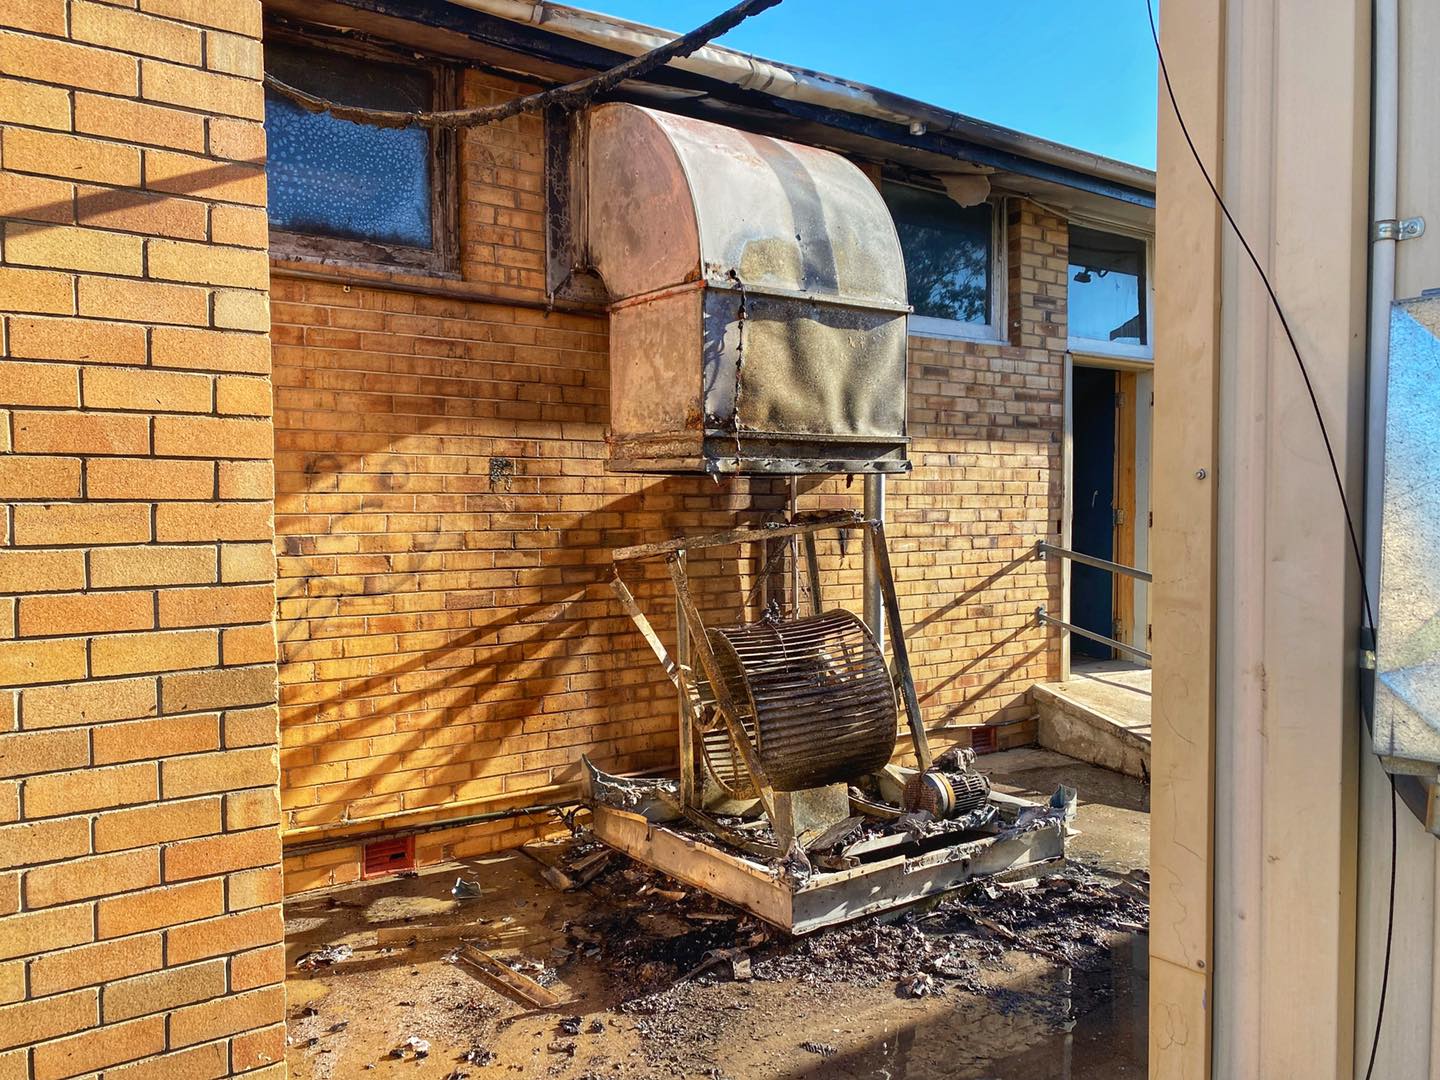 The unit after the fire was extinguished by firefighters. Photo: Fire and Rescue NSW Station 399 Narrabri.